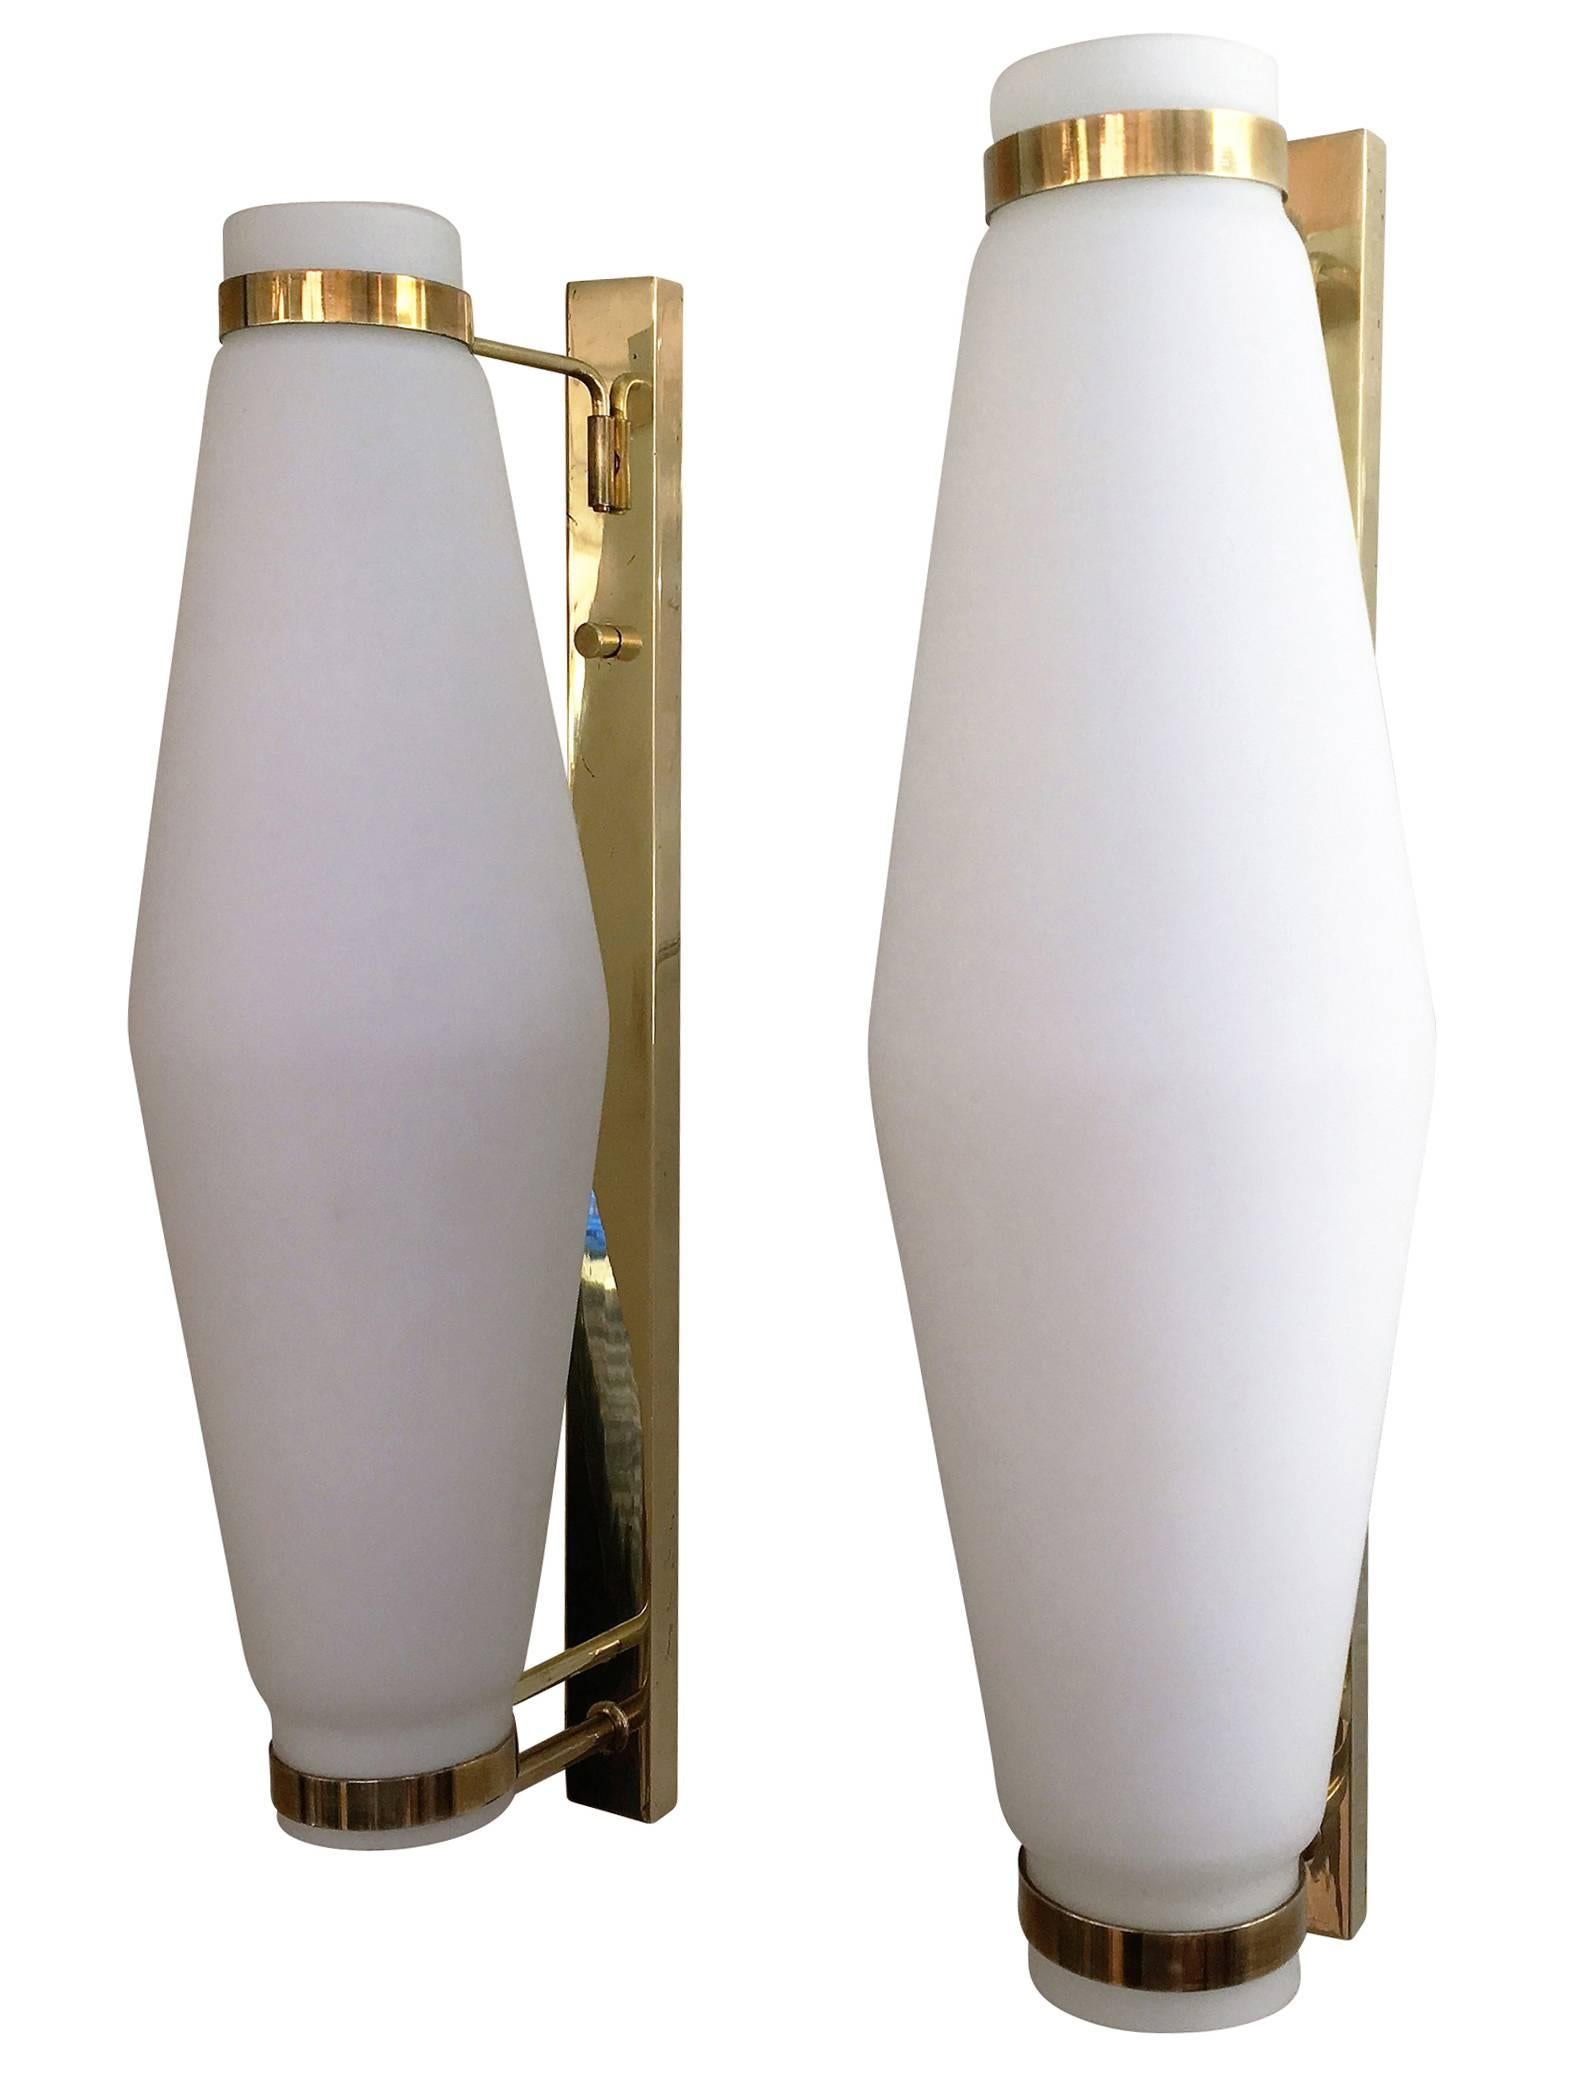 Elegant pair of elongated sconces possibly manufactured by Stilnovo or Arredoluce in the 1960s. They feature a frosted glass shade which is tapered at the ends. The hardware is brass and each holds one candelabra socket.
